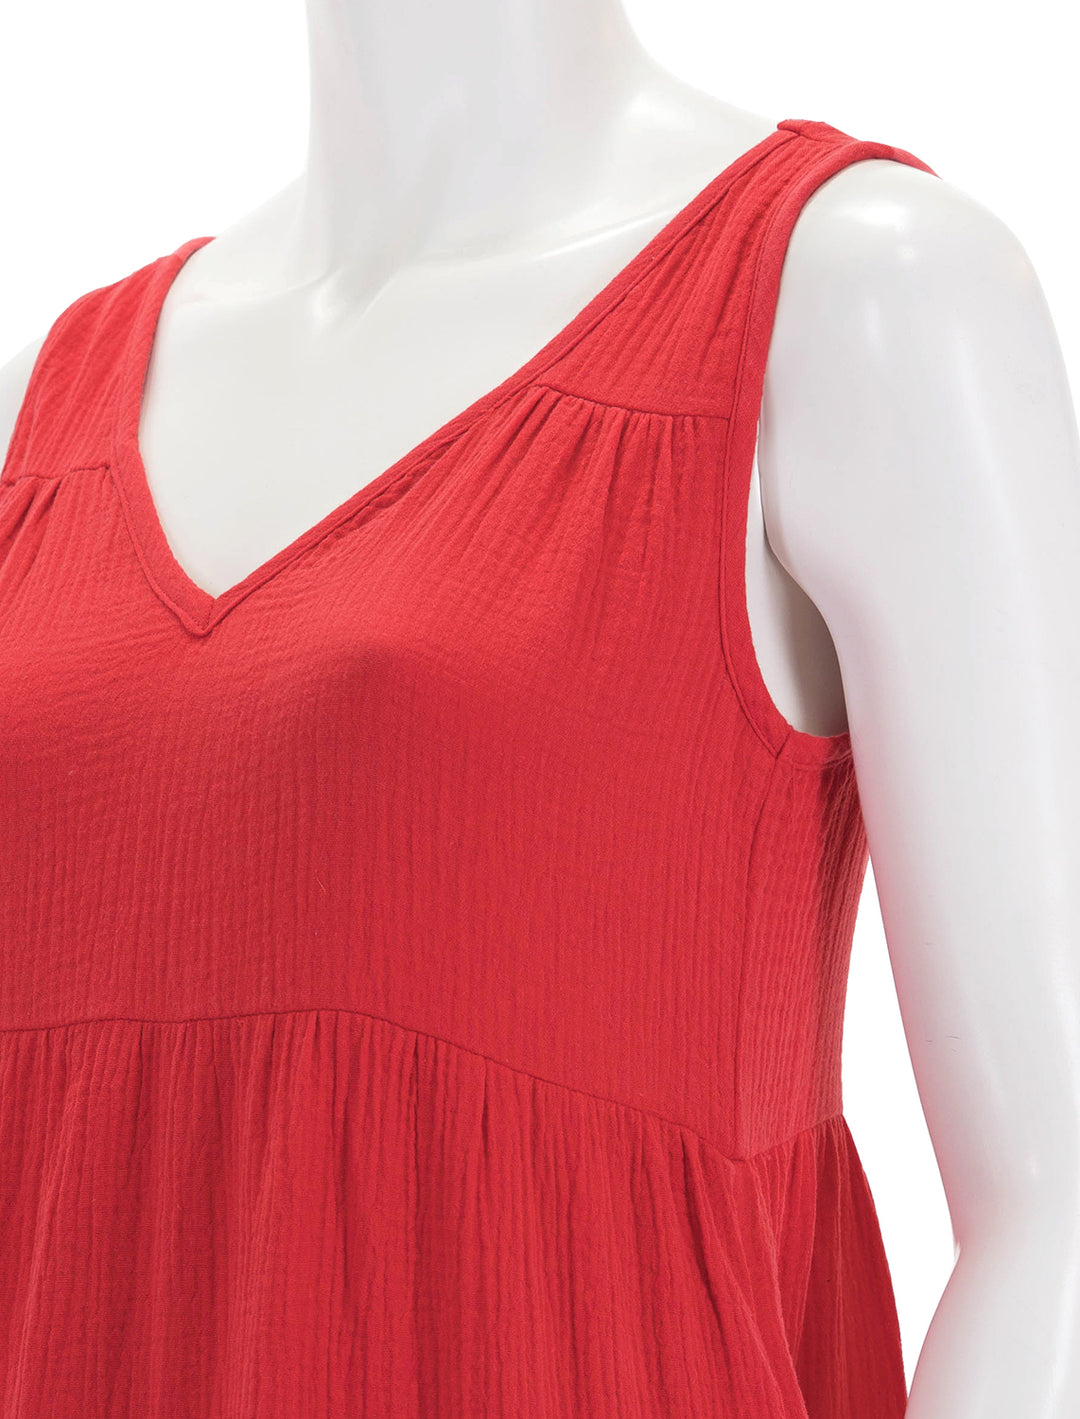 Close-up view of Marine Layer's corinne maxi dress in red.